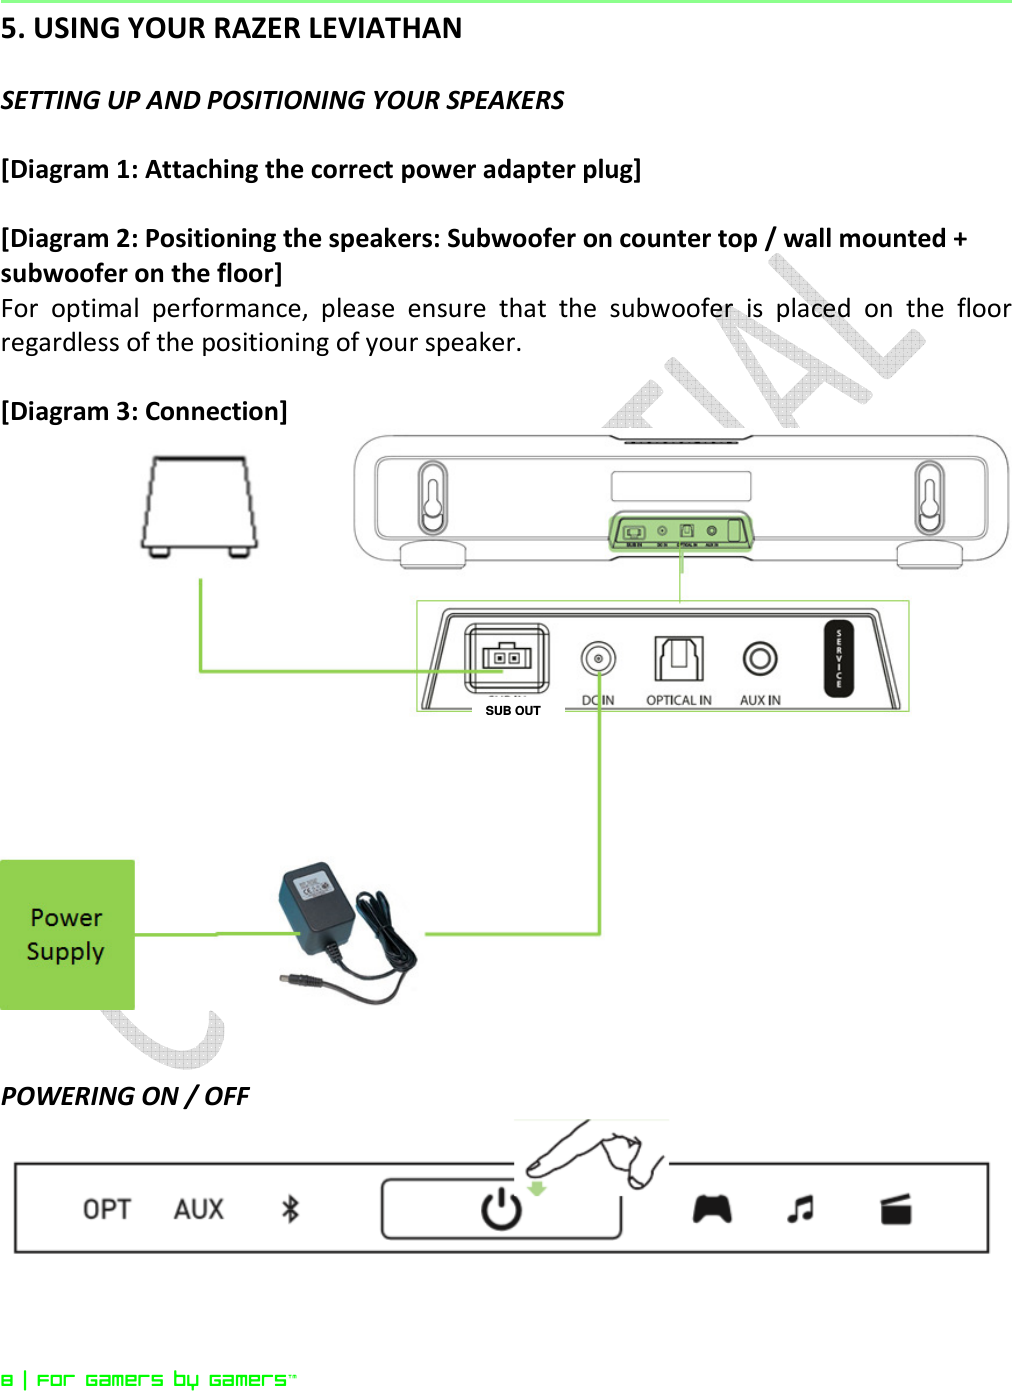  8 | For gamers by gamers™  5. USING YOUR RAZER LEVIATHAN  SETTING UP AND POSITIONING YOUR SPEAKERS  [Diagram 1: Attaching the correct power adapter plug]  [Diagram 2: Positioning the speakers: Subwoofer on counter top / wall mounted + subwoofer on the floor] For  optimal  performance,  please  ensure  that  the  subwoofer  is  placed  on  the  floor regardless of the positioning of your speaker.  [Diagram 3: Connection]    POWERING ON / OFF   SUB OUT 